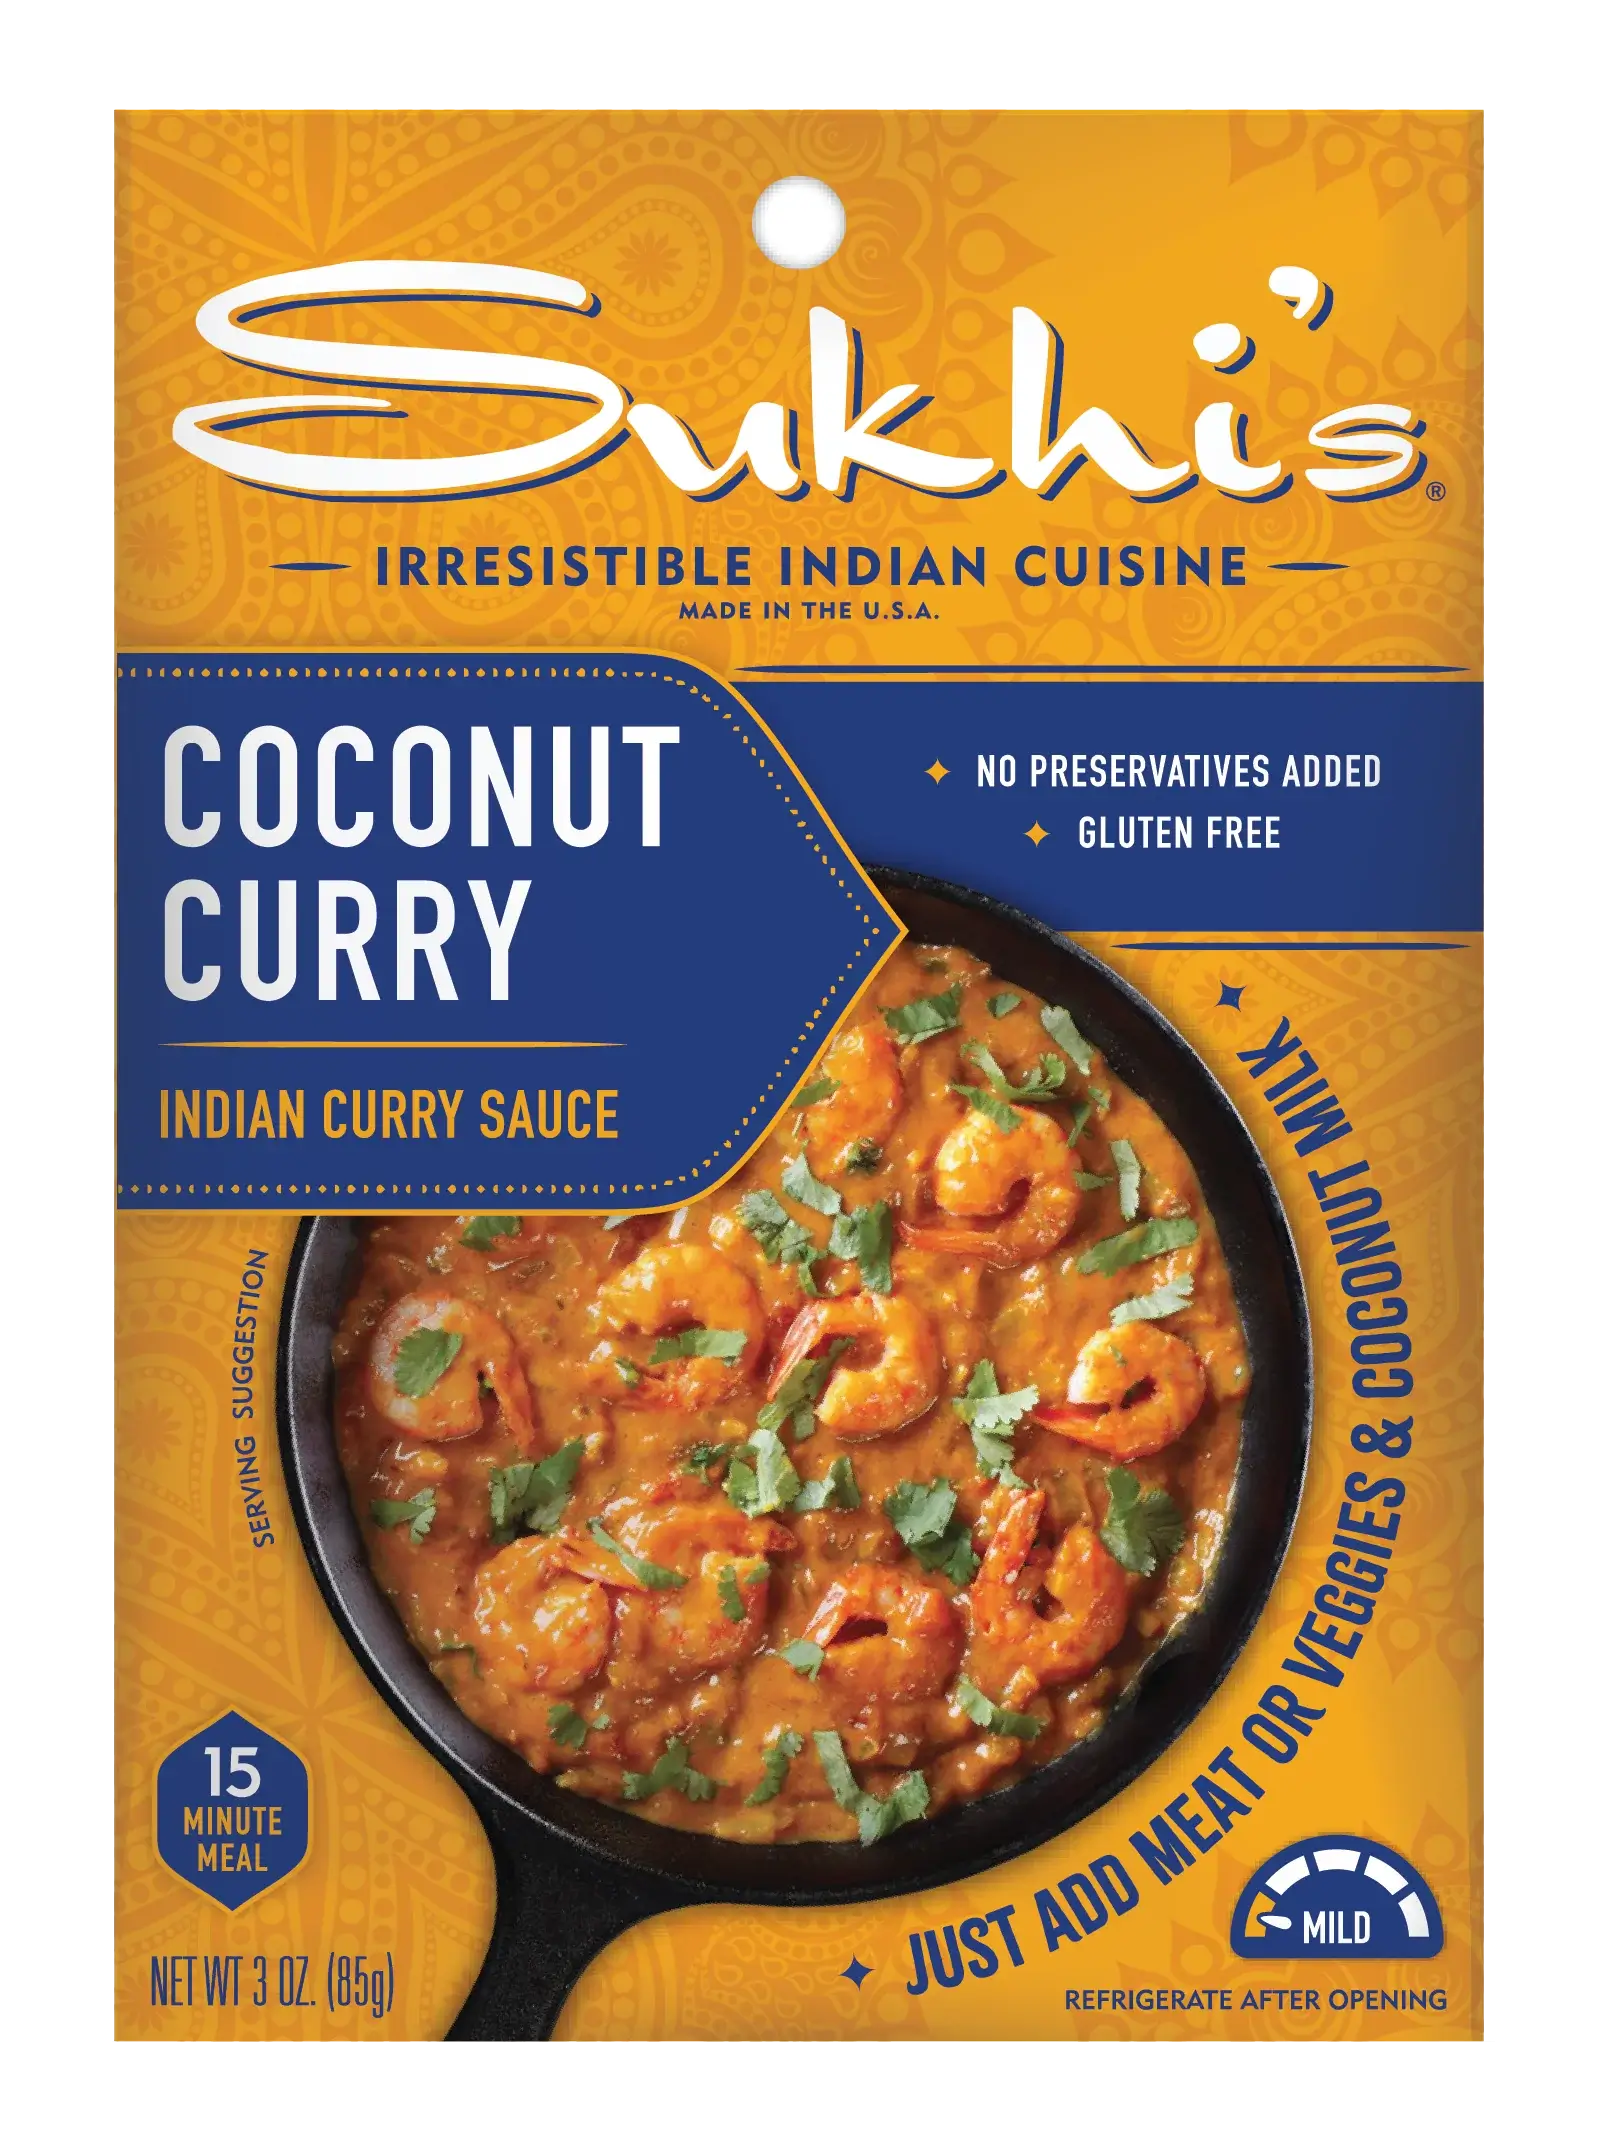 Coconut Curry Indian Curry Sauce